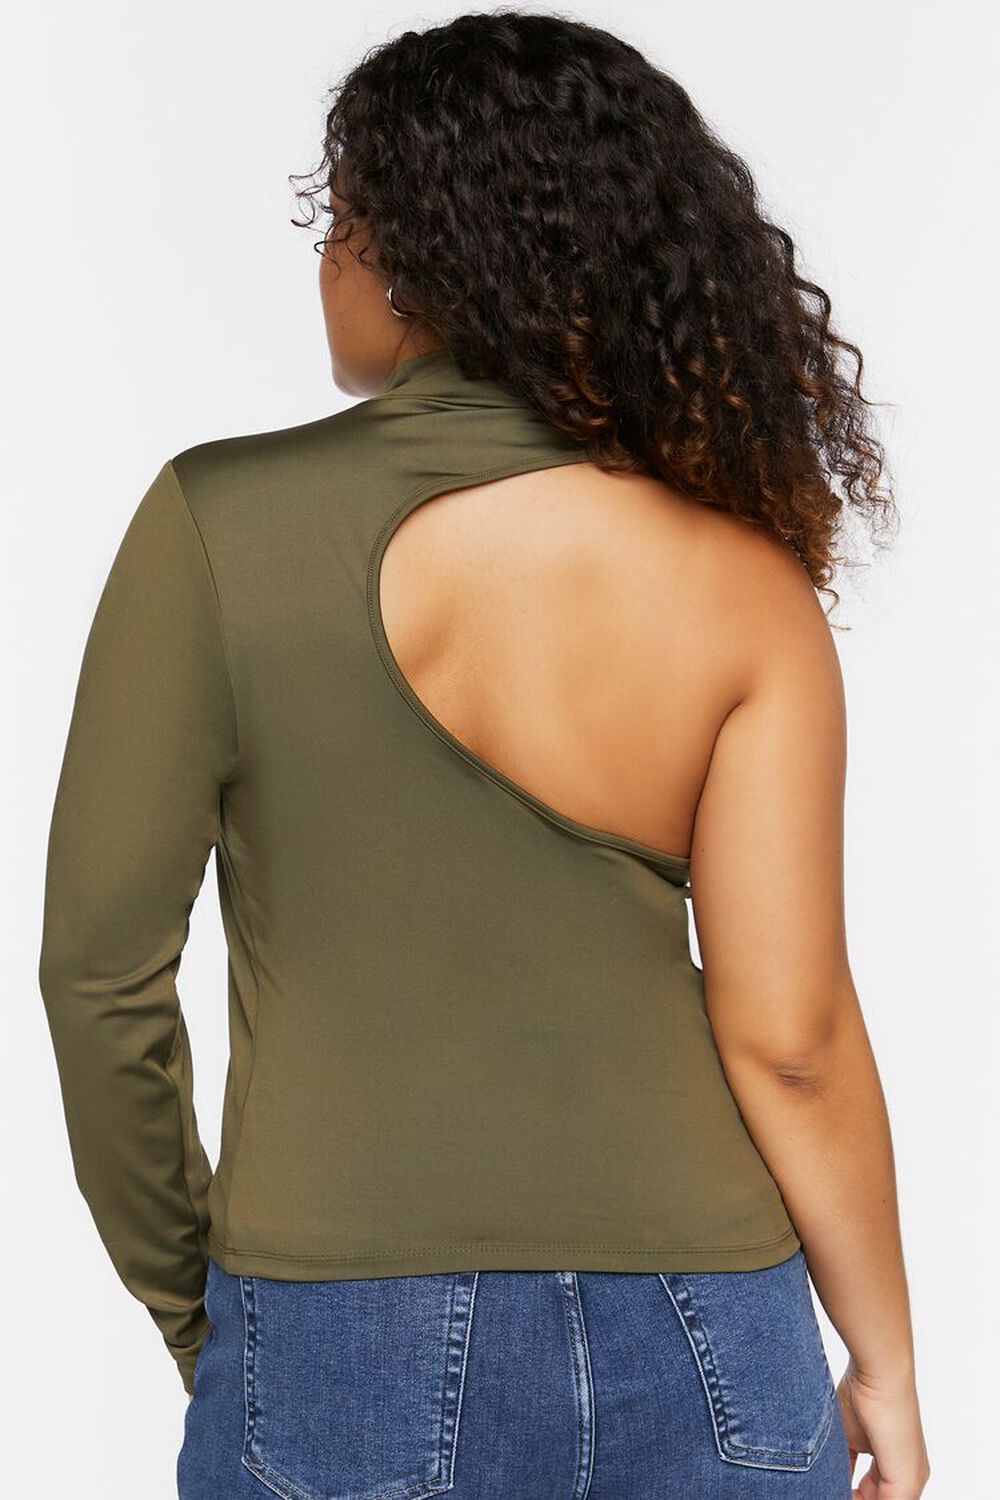 CYPRESS  Plus Size One-Sleeve Cutout Top, image 3